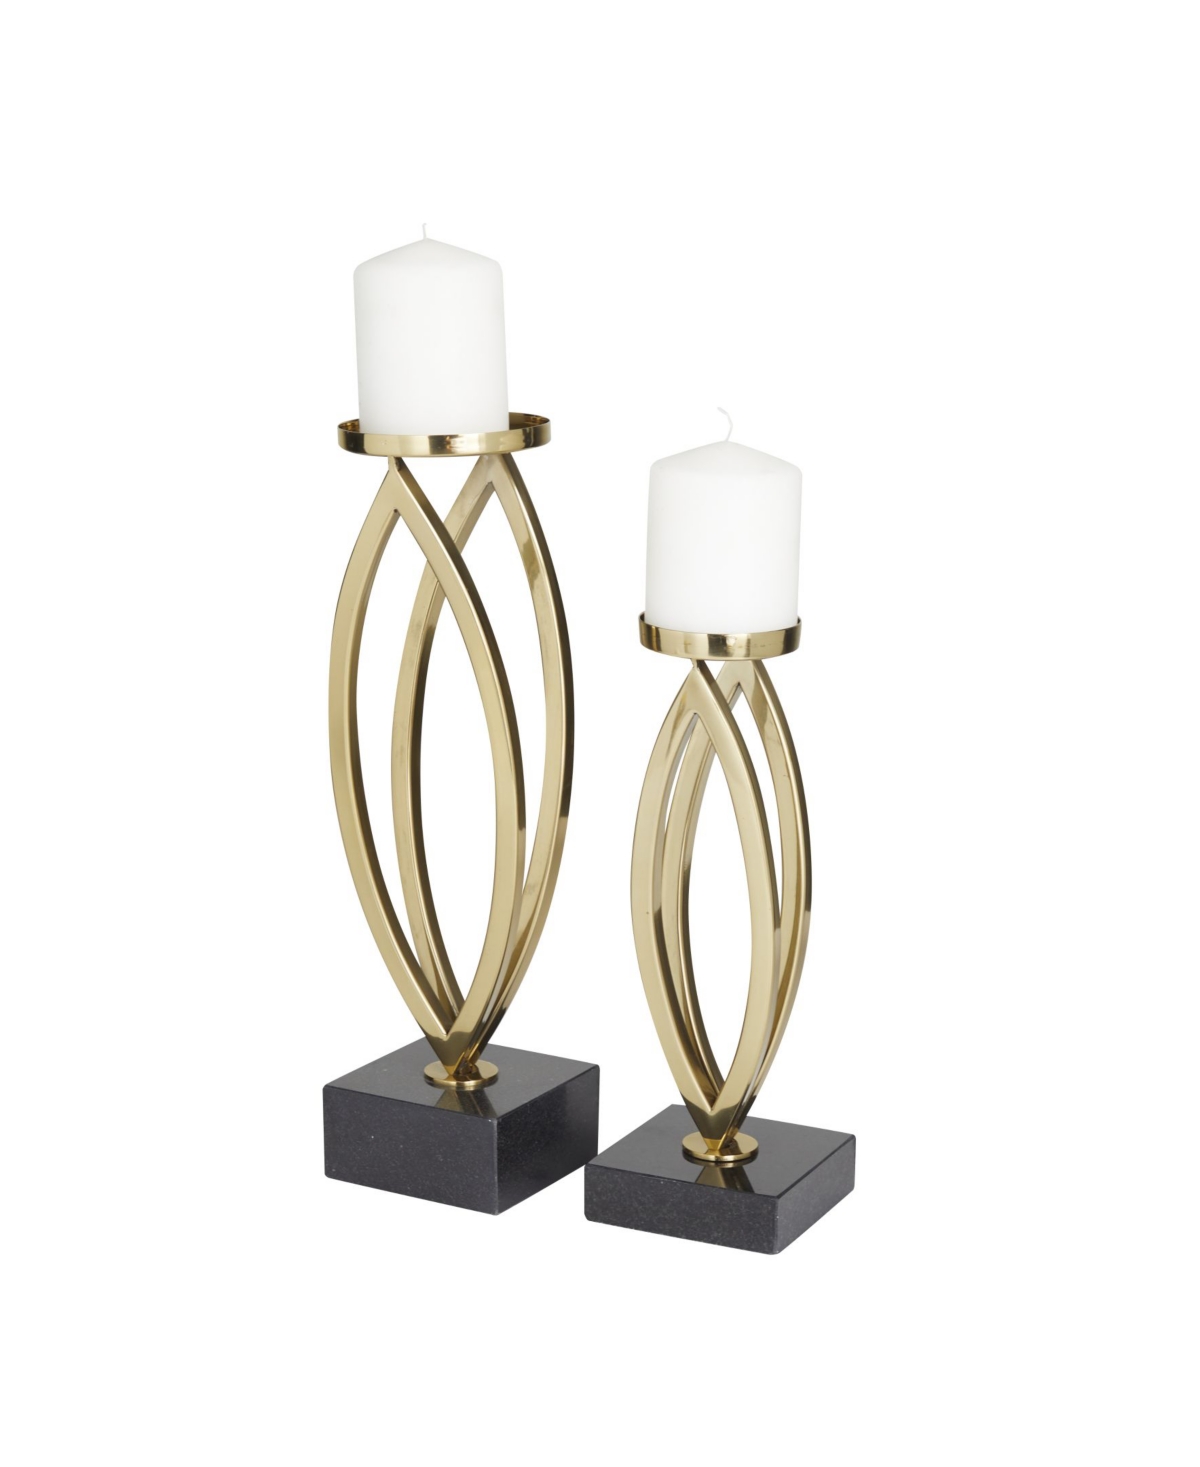 Stainless Steel Candle Holder, Set of 2